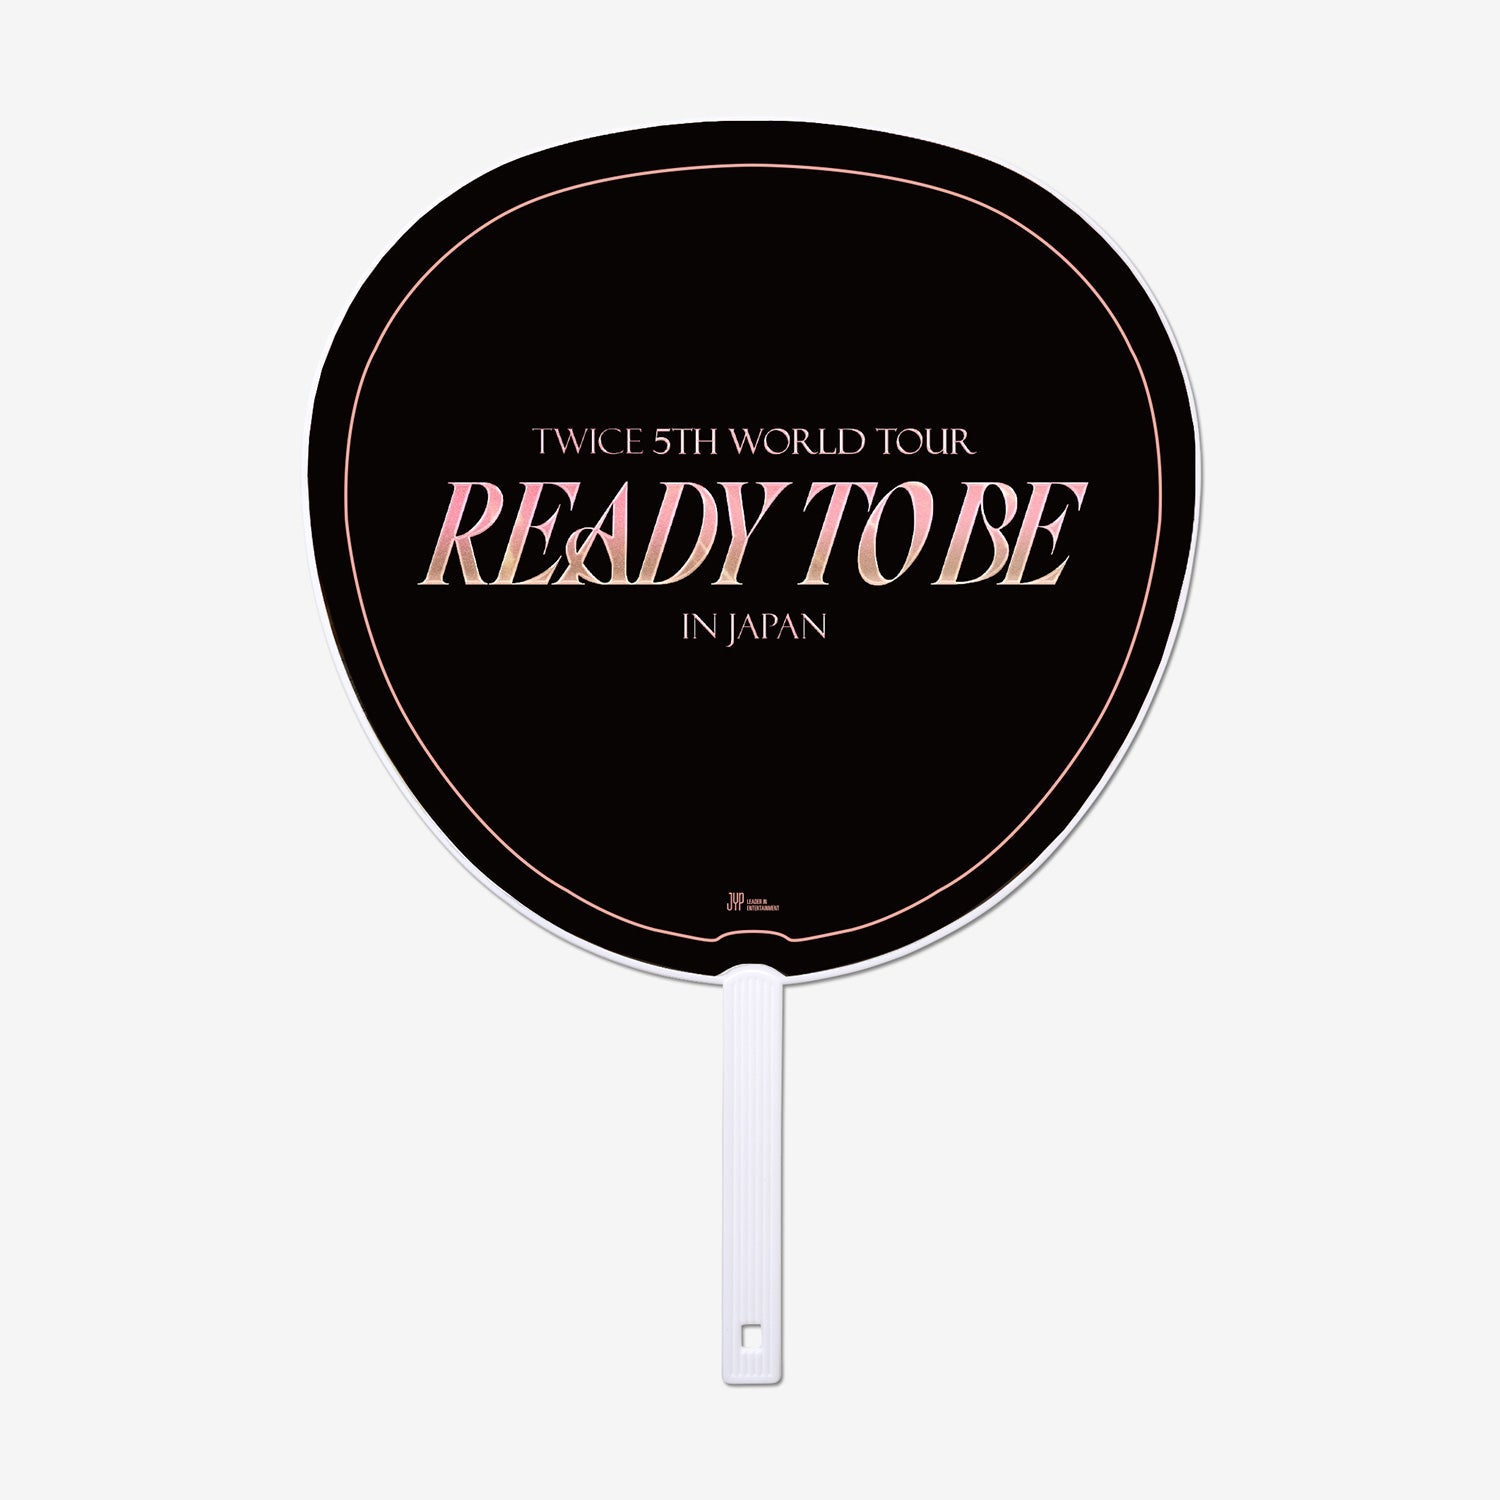 IMAGE PICKET - CHAEYOUNG【DOME】/ TWICE『READY TO BE』